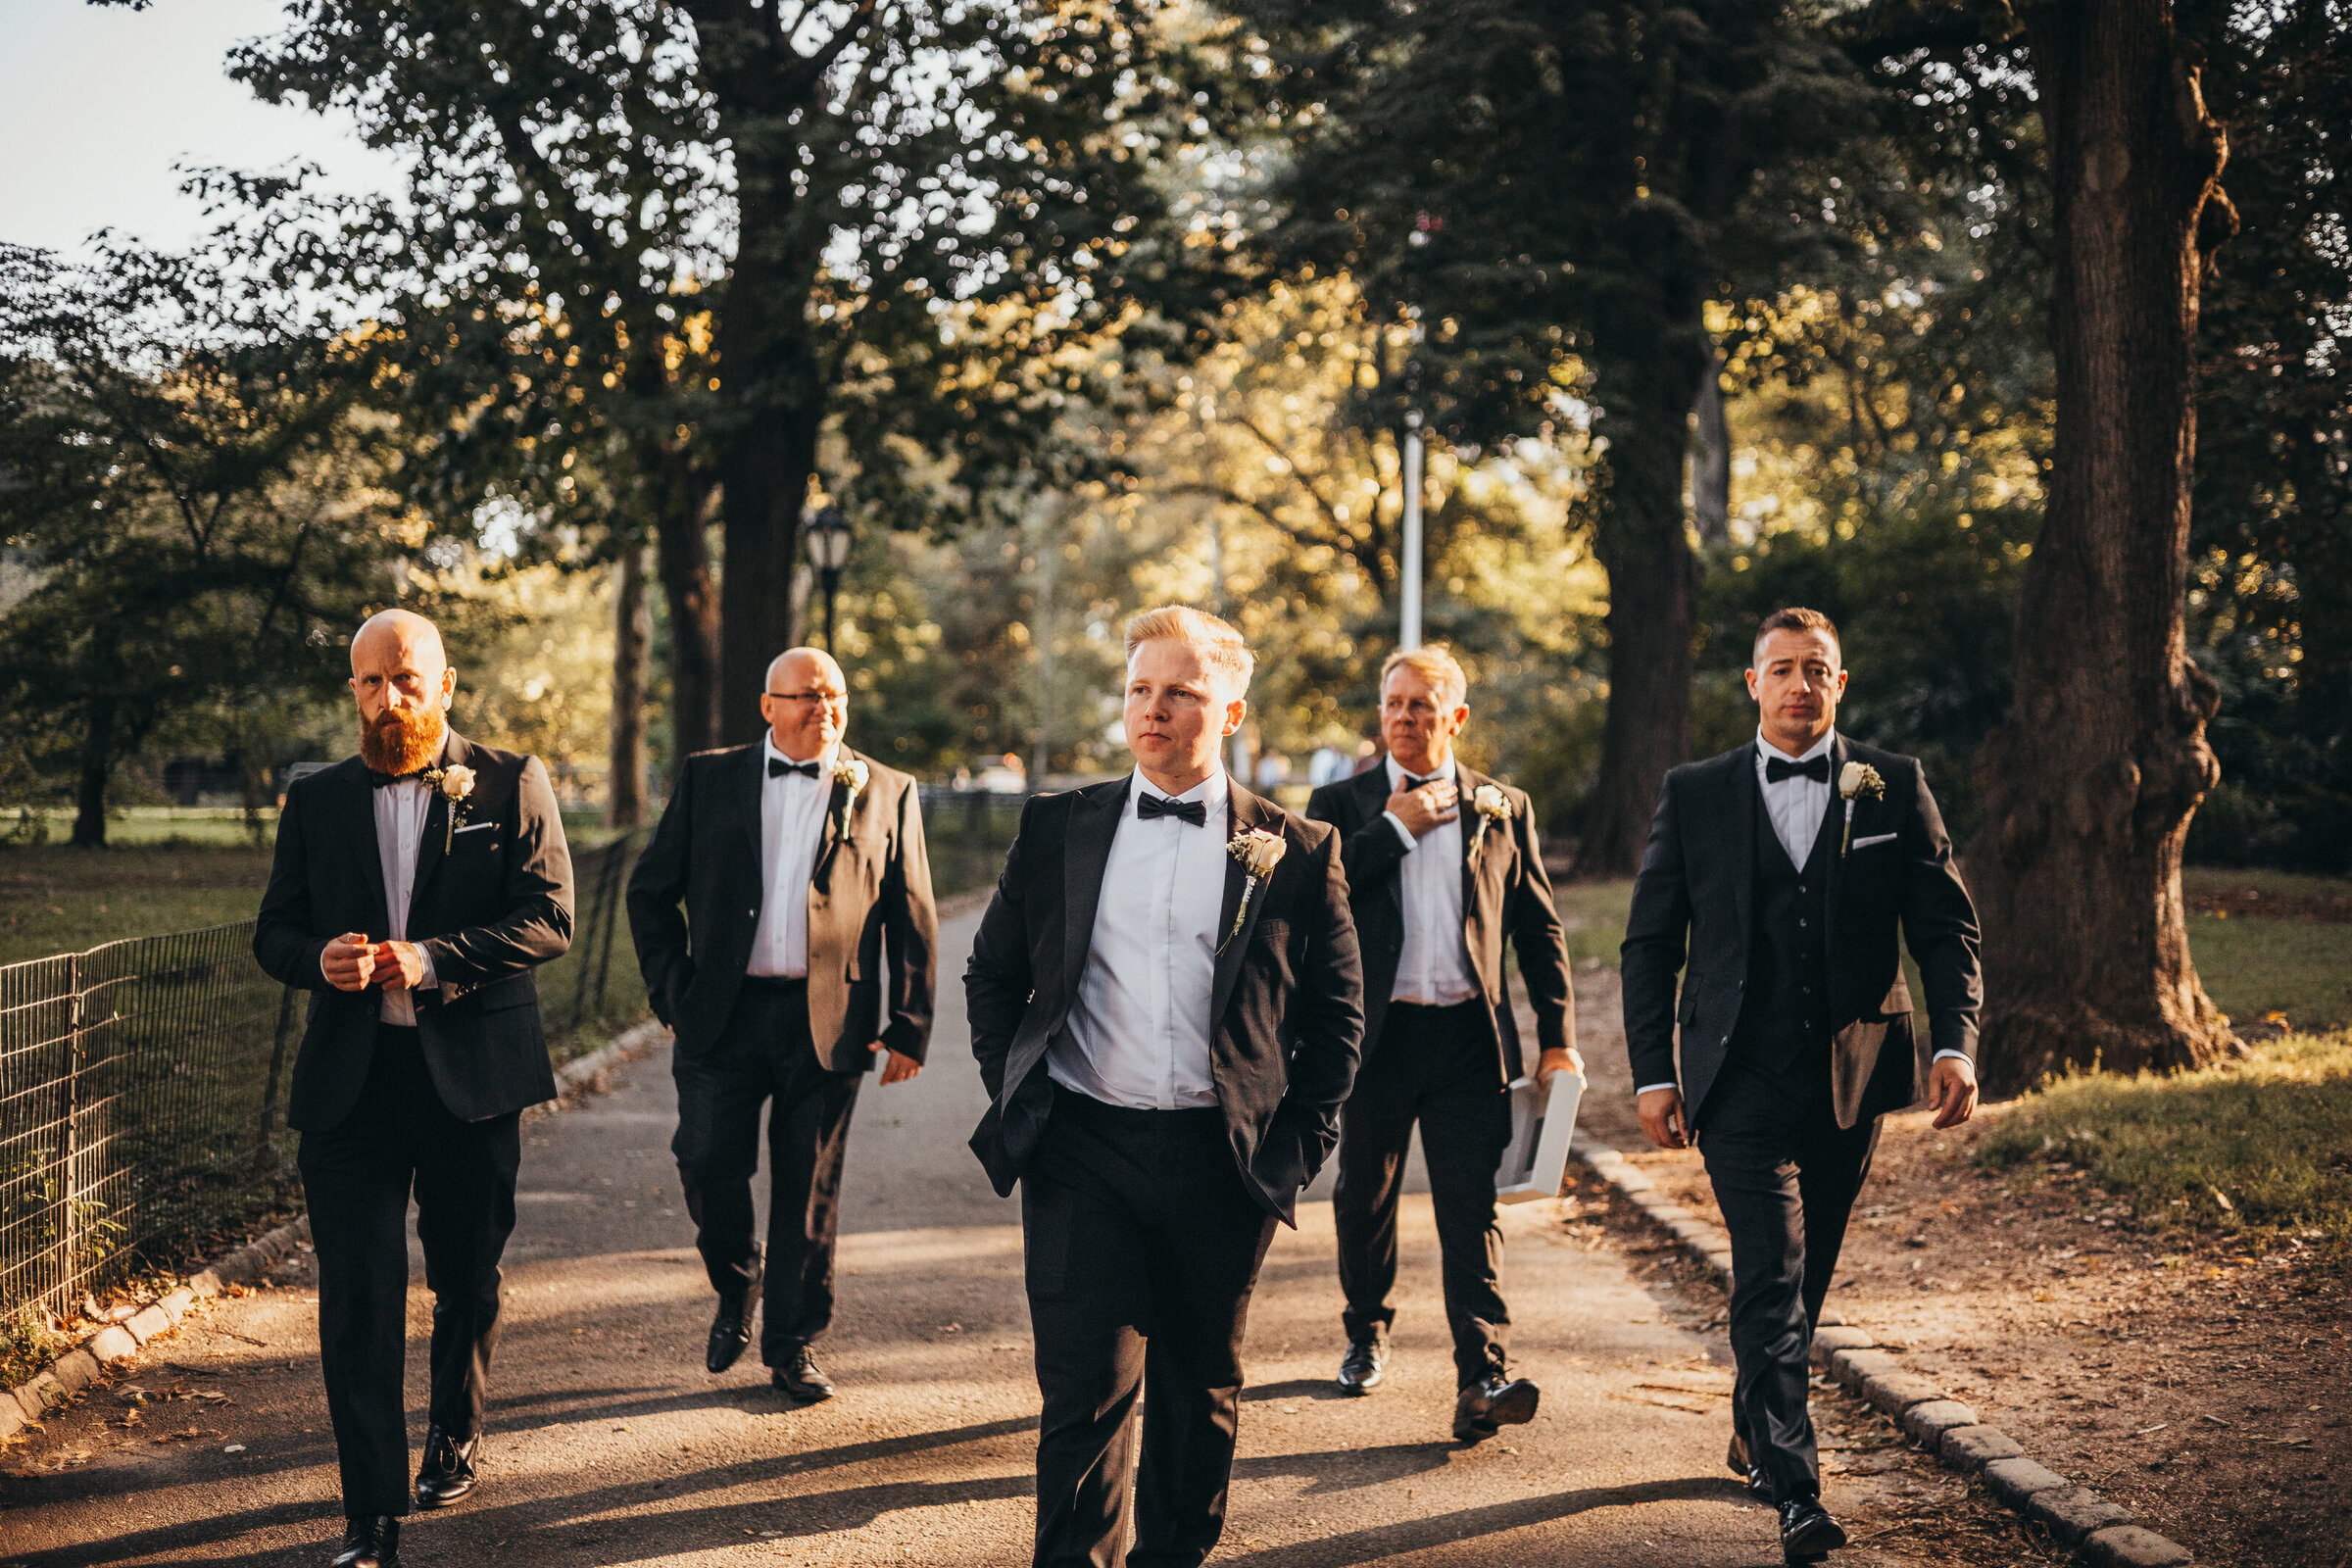 Groom and groomsmen in Tuxedos walking through central park